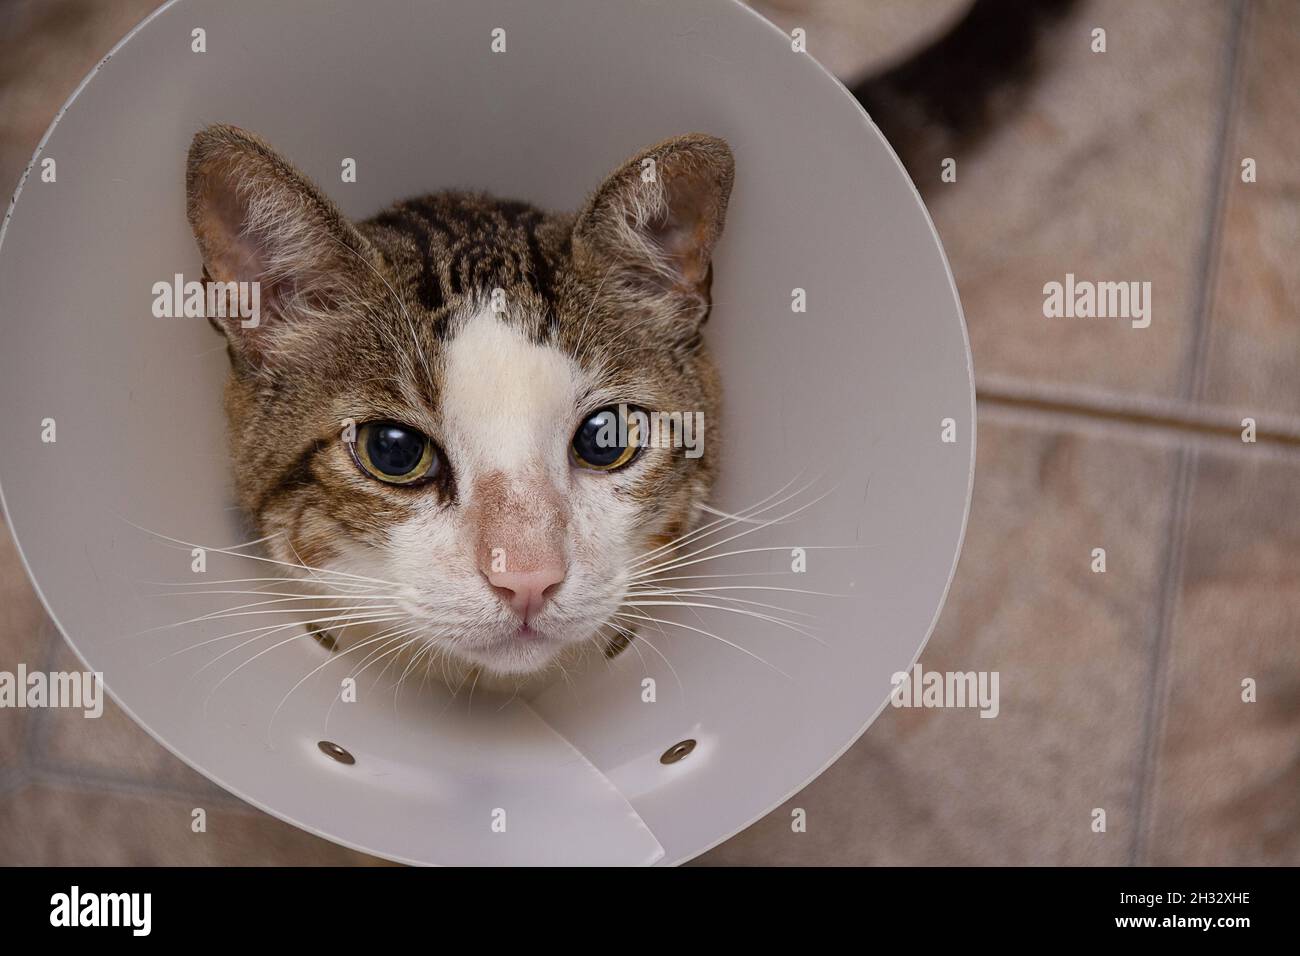 Face of a short-haired tabby, undergoing treatment, wearing an Elizabethan collar on its neck. Stock Photo